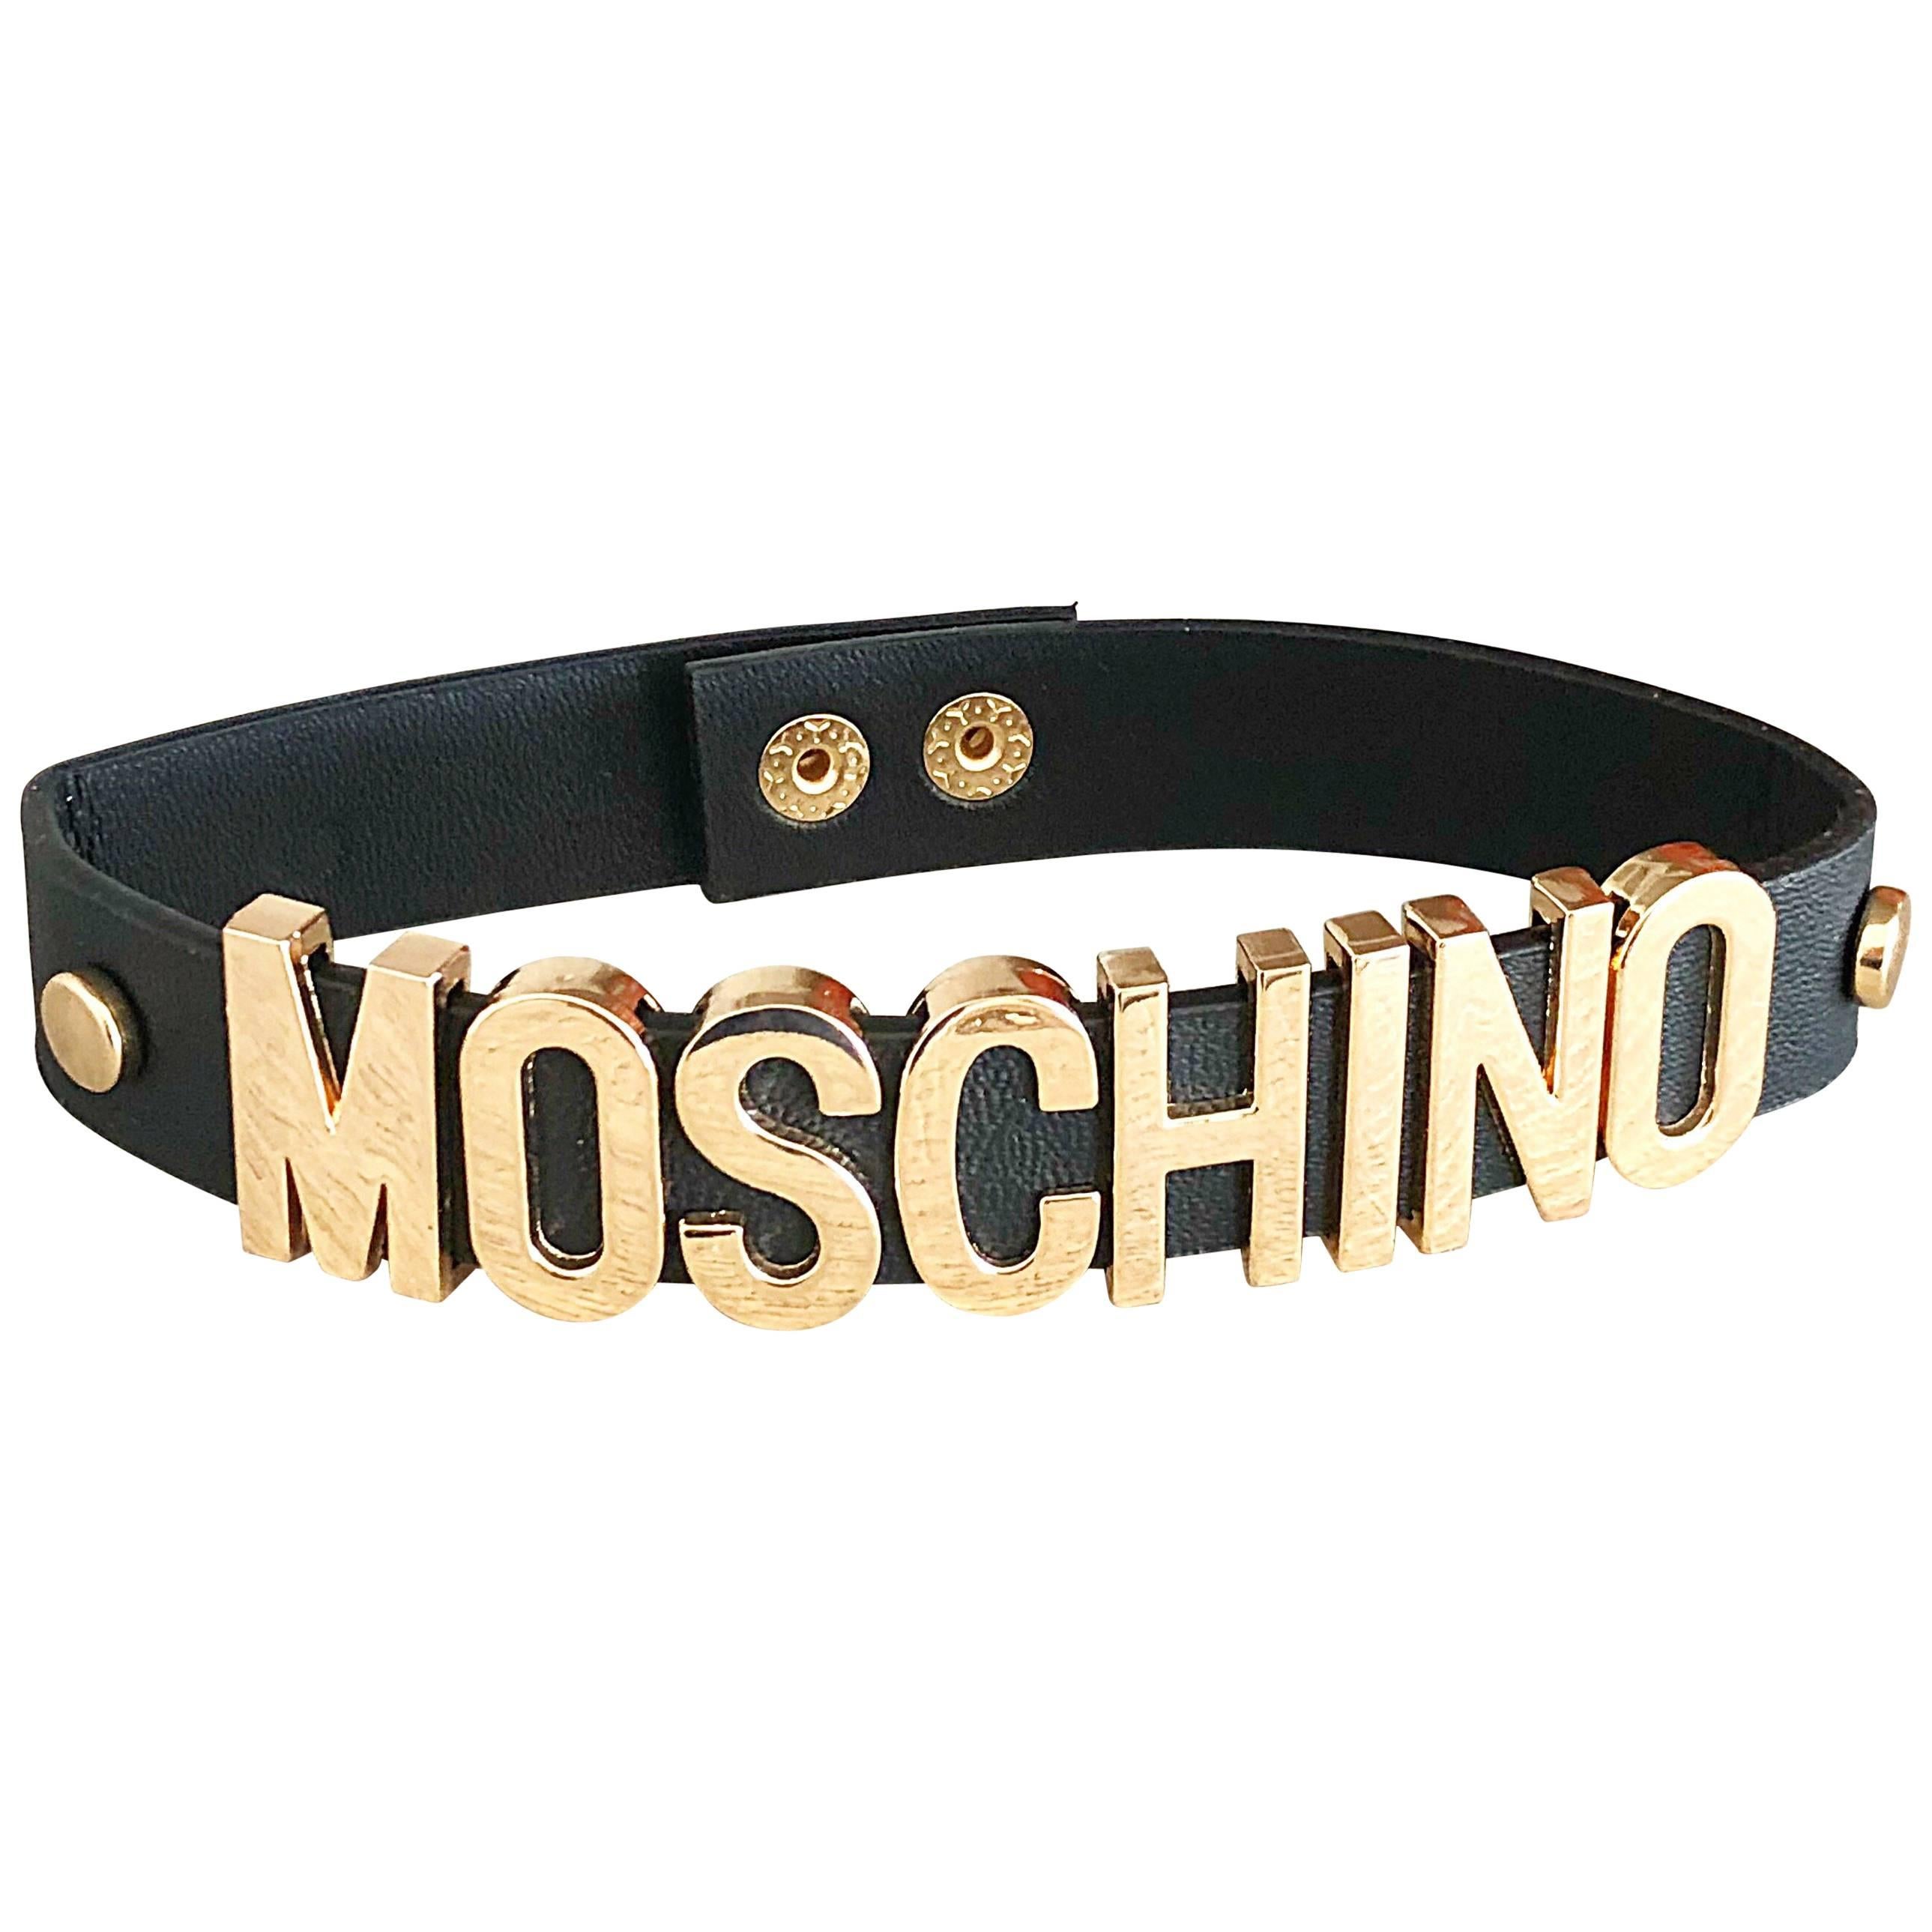 1990s Moschino Black and Gold Leather Vintage 90s Logo Choker Necklace 